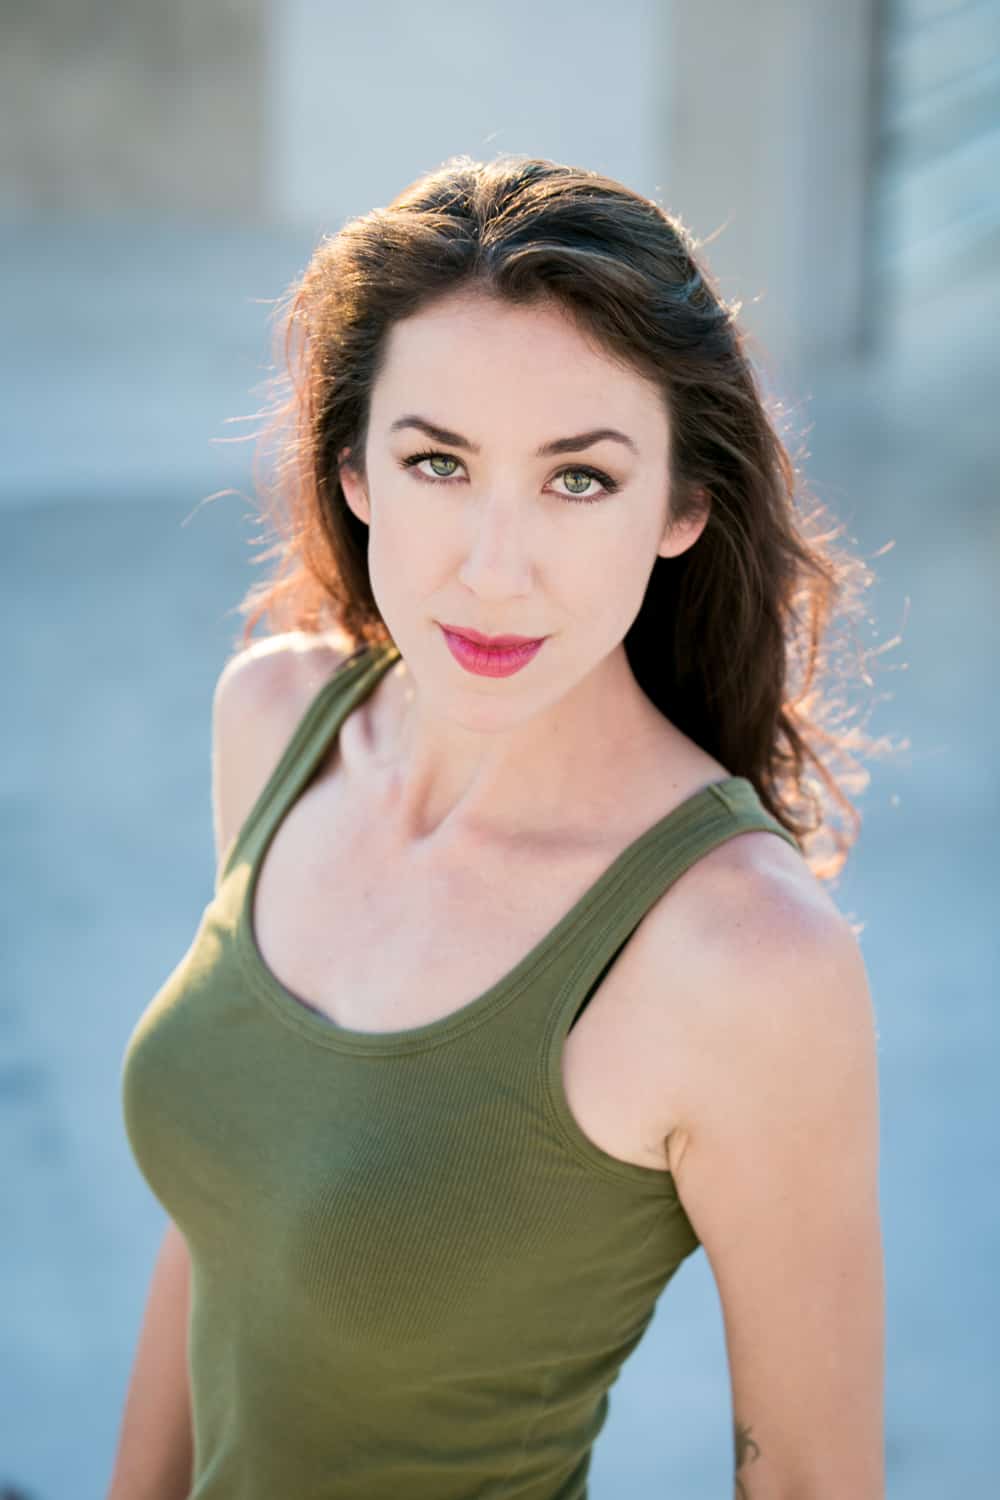 Headshot of model with long dark hair and olive tank top